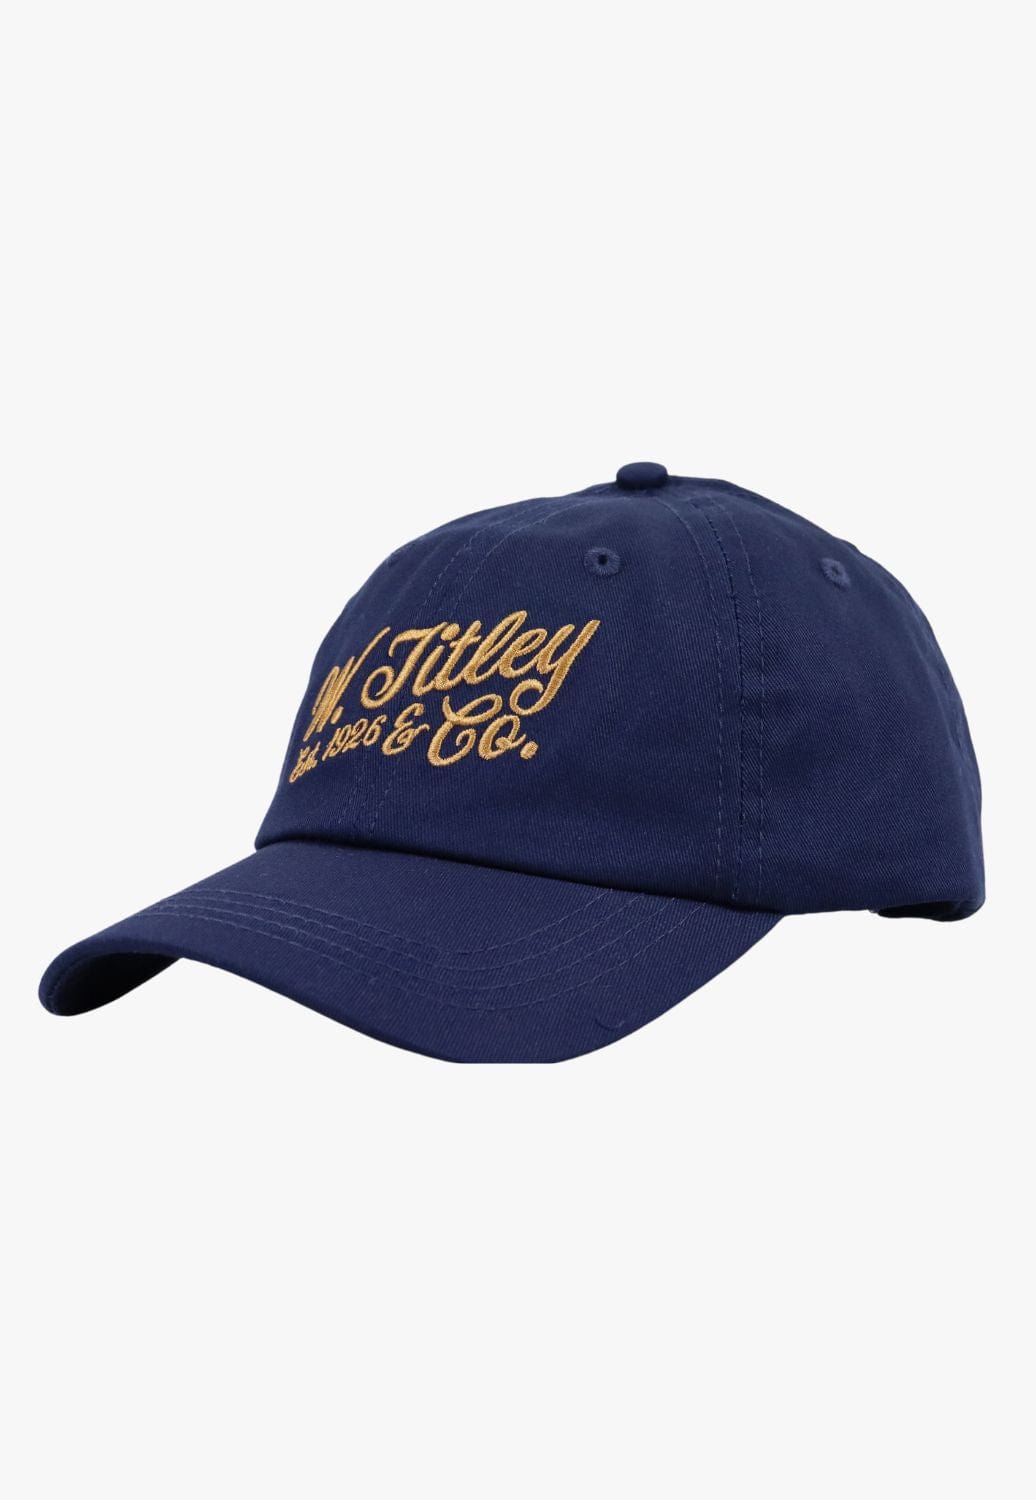 W. Titley and Co HATS - Caps Navy W. Titley & Co Relaxed Cap